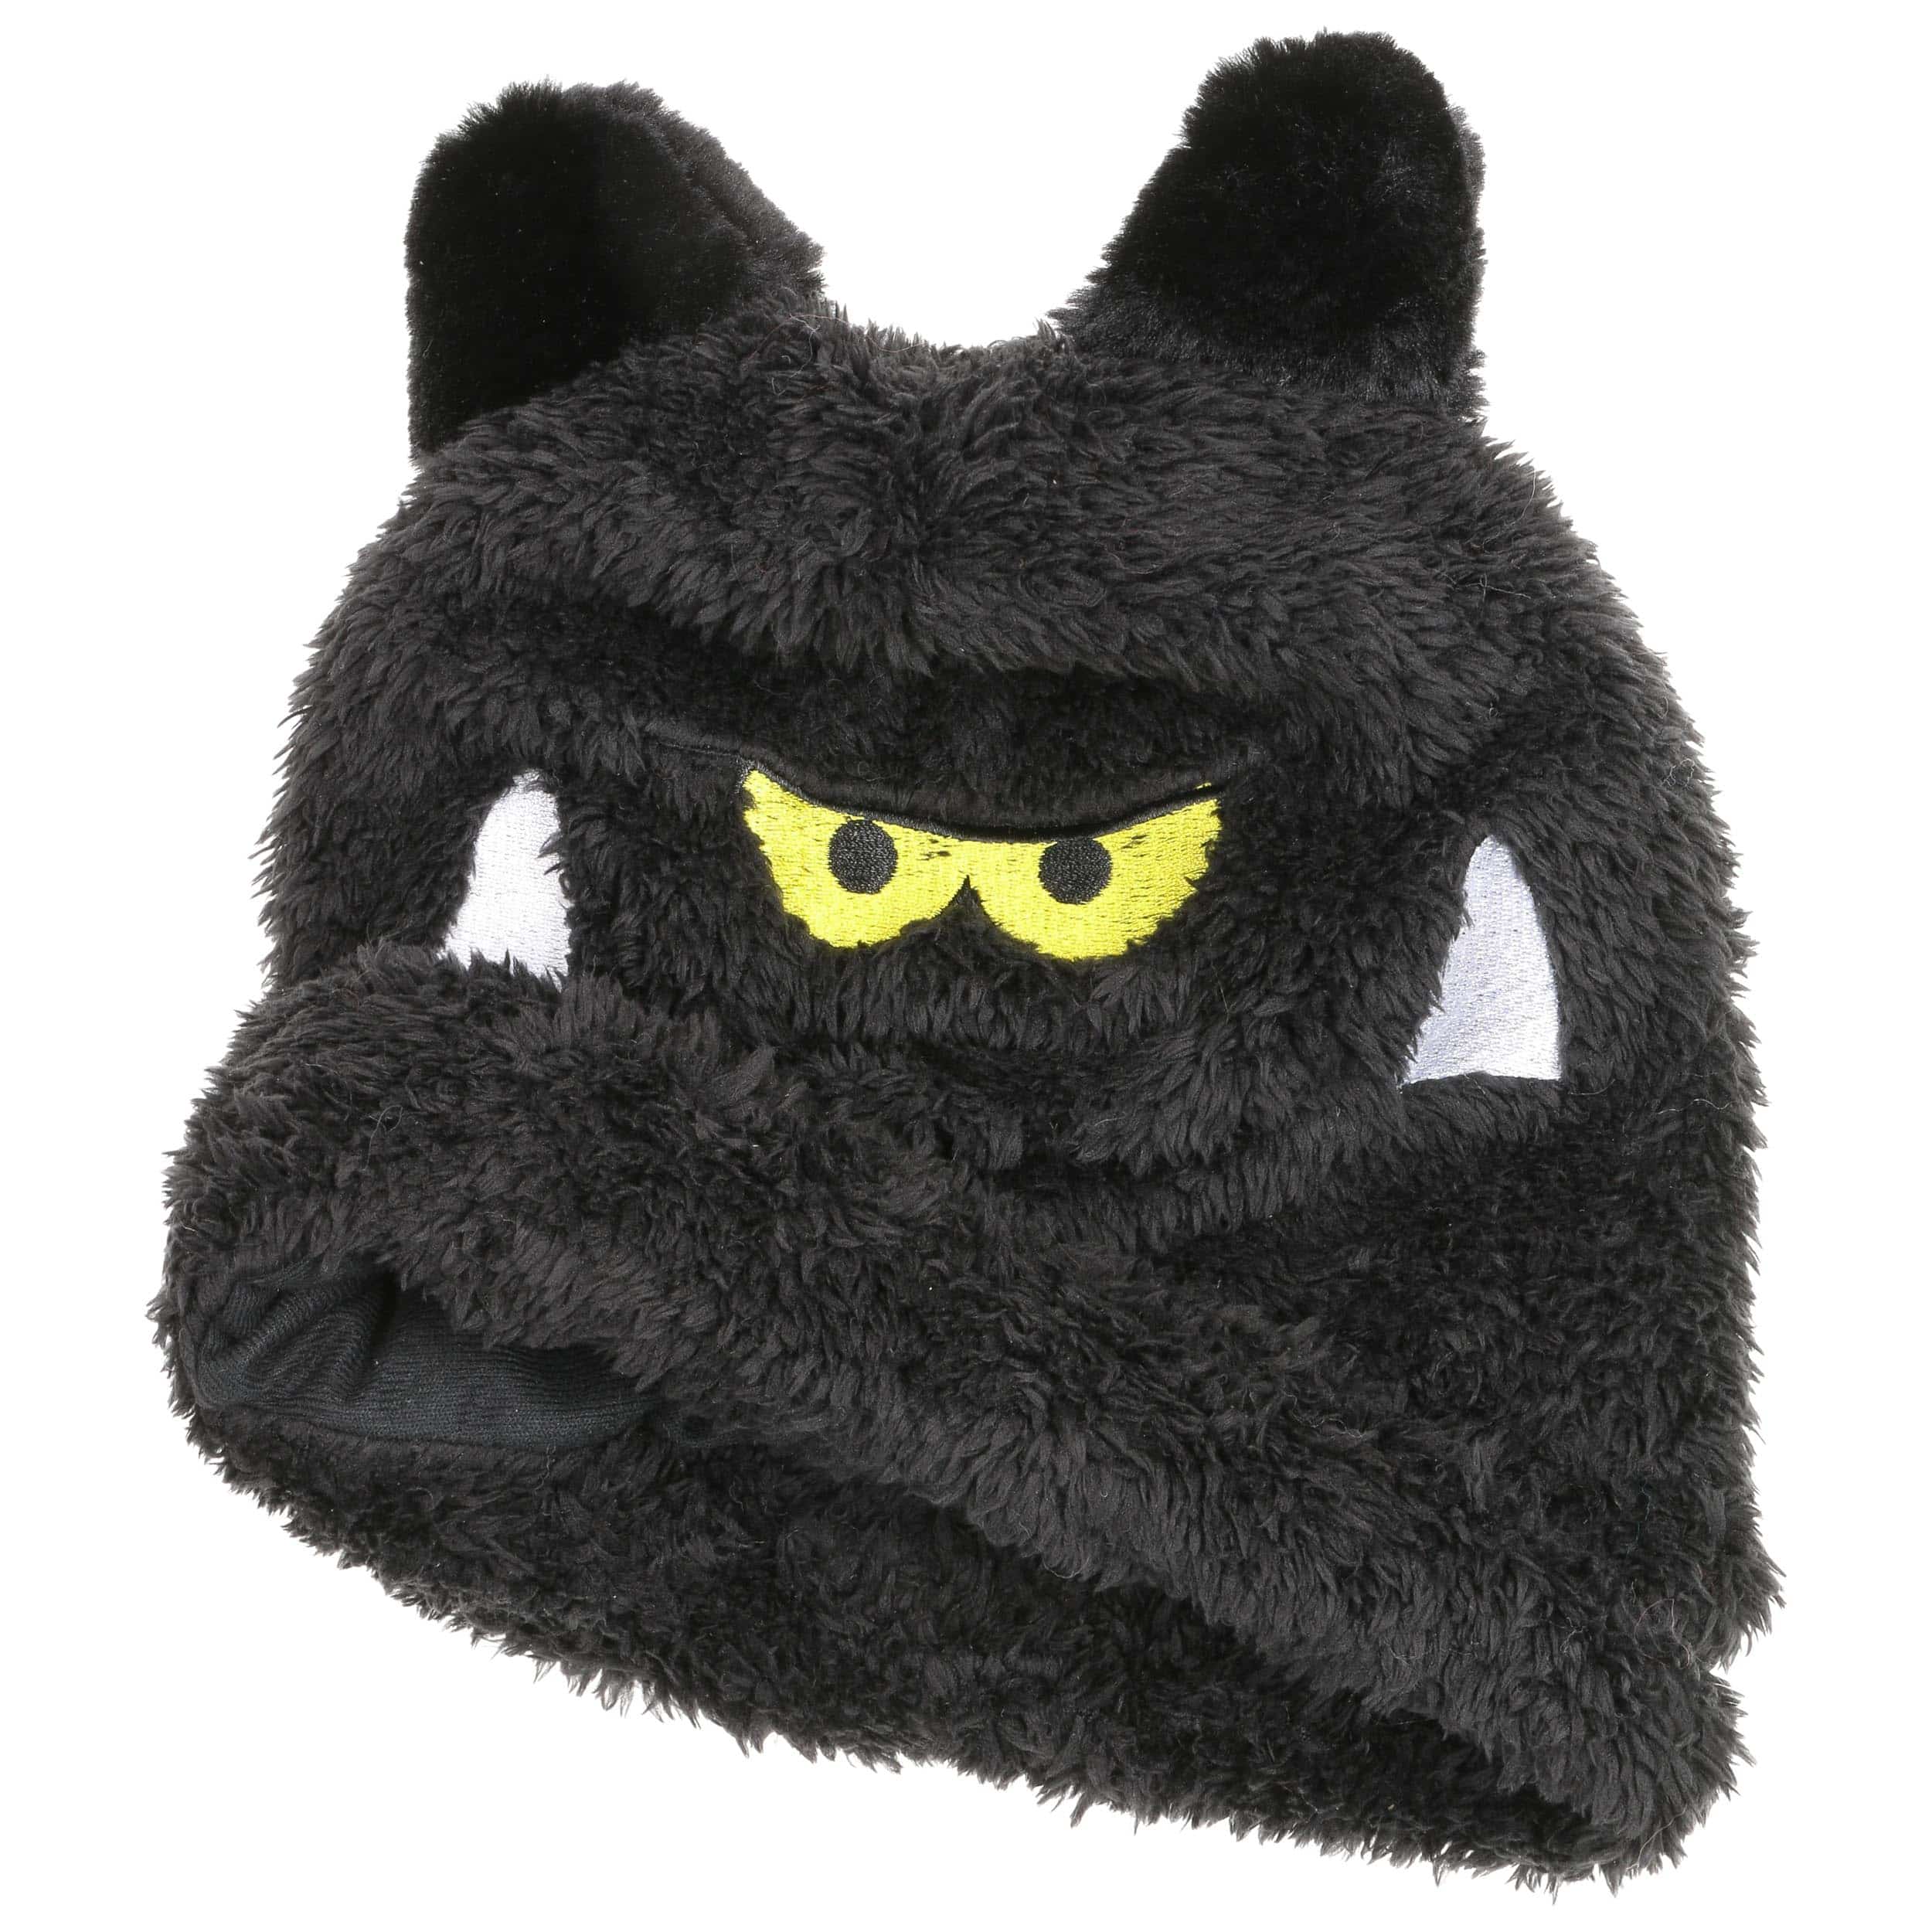 Soft Monster Beanie by Barts - 14,95